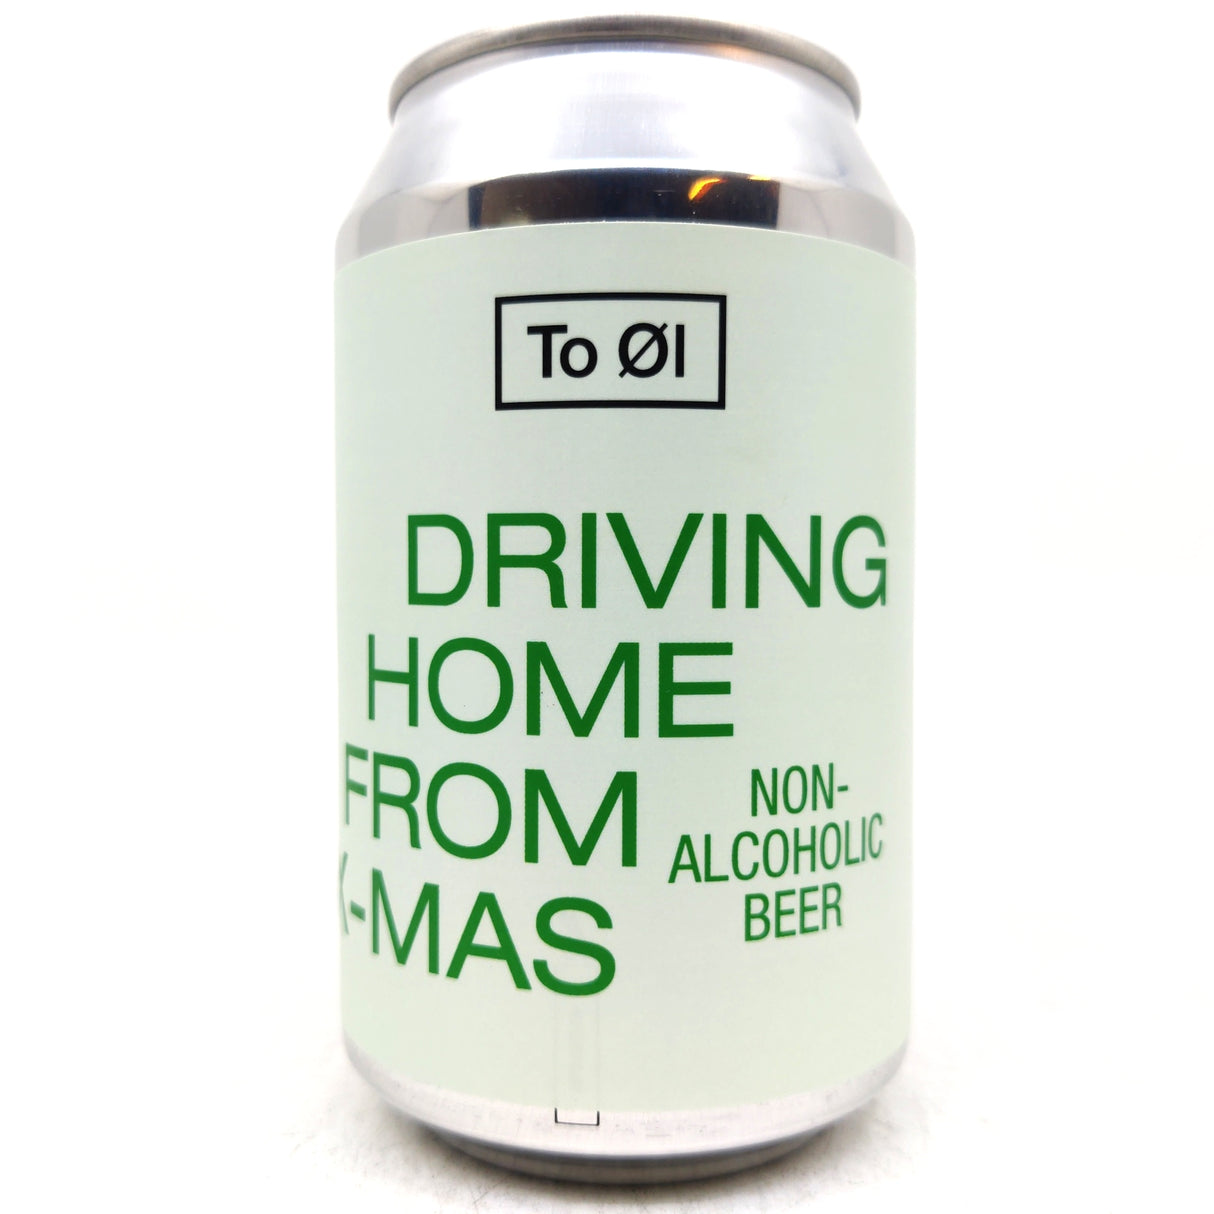 To Ol Driving Home From Christmas Alcohol Free Pale Ale 0.3% (330ml can)-Hop Burns & Black